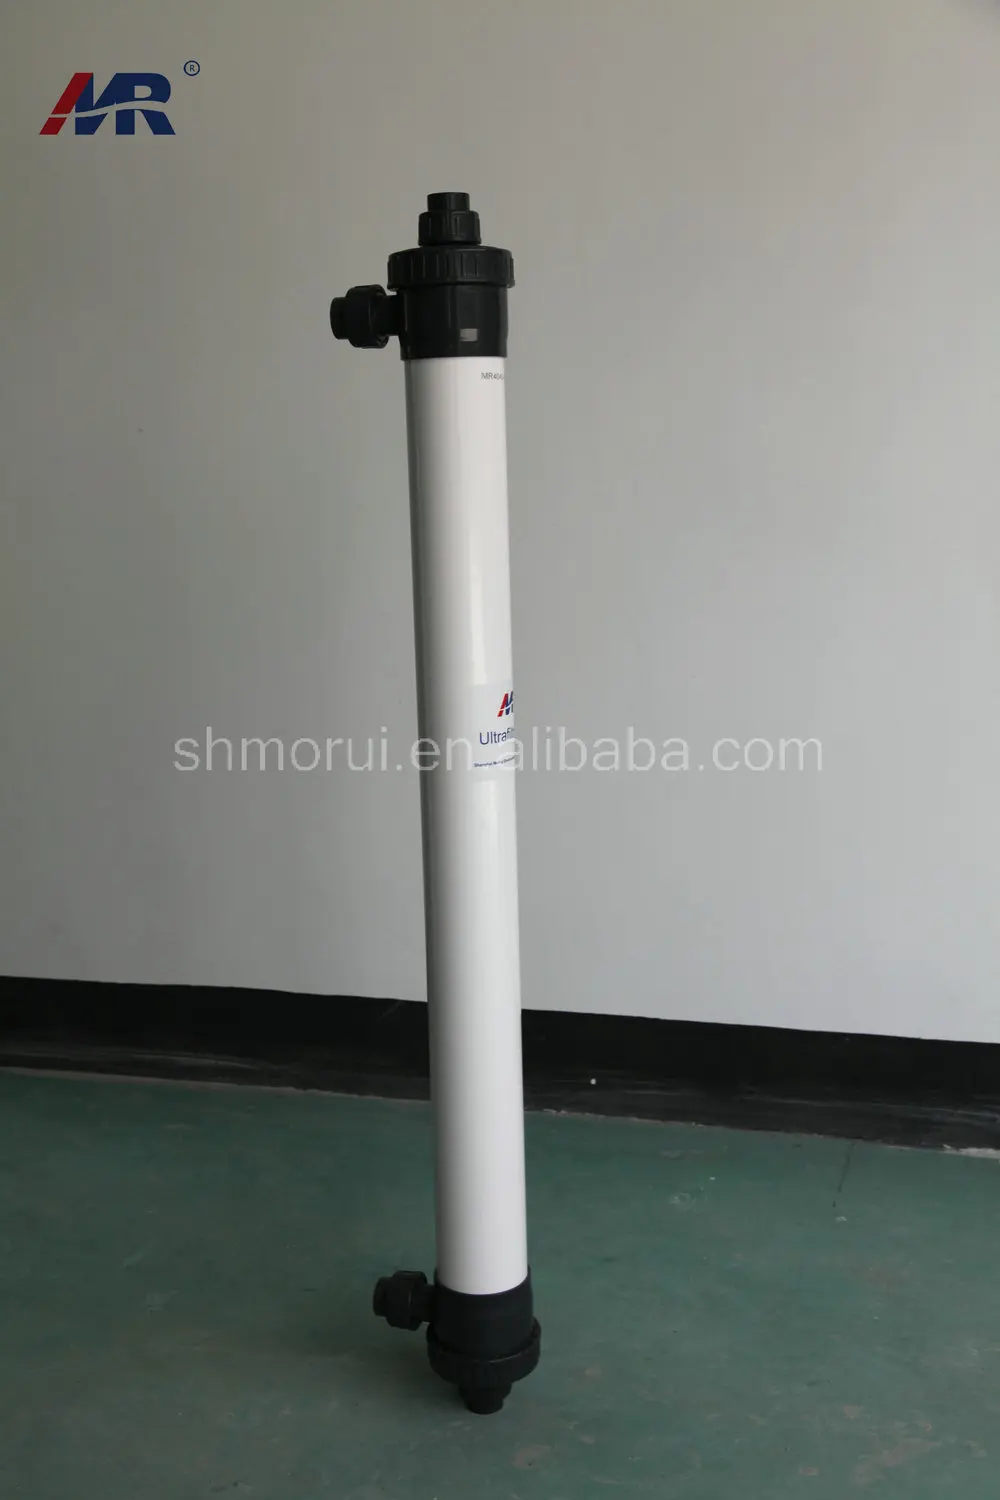 PVDF hollow fiber ultrafiltration UF membrane for water purification system